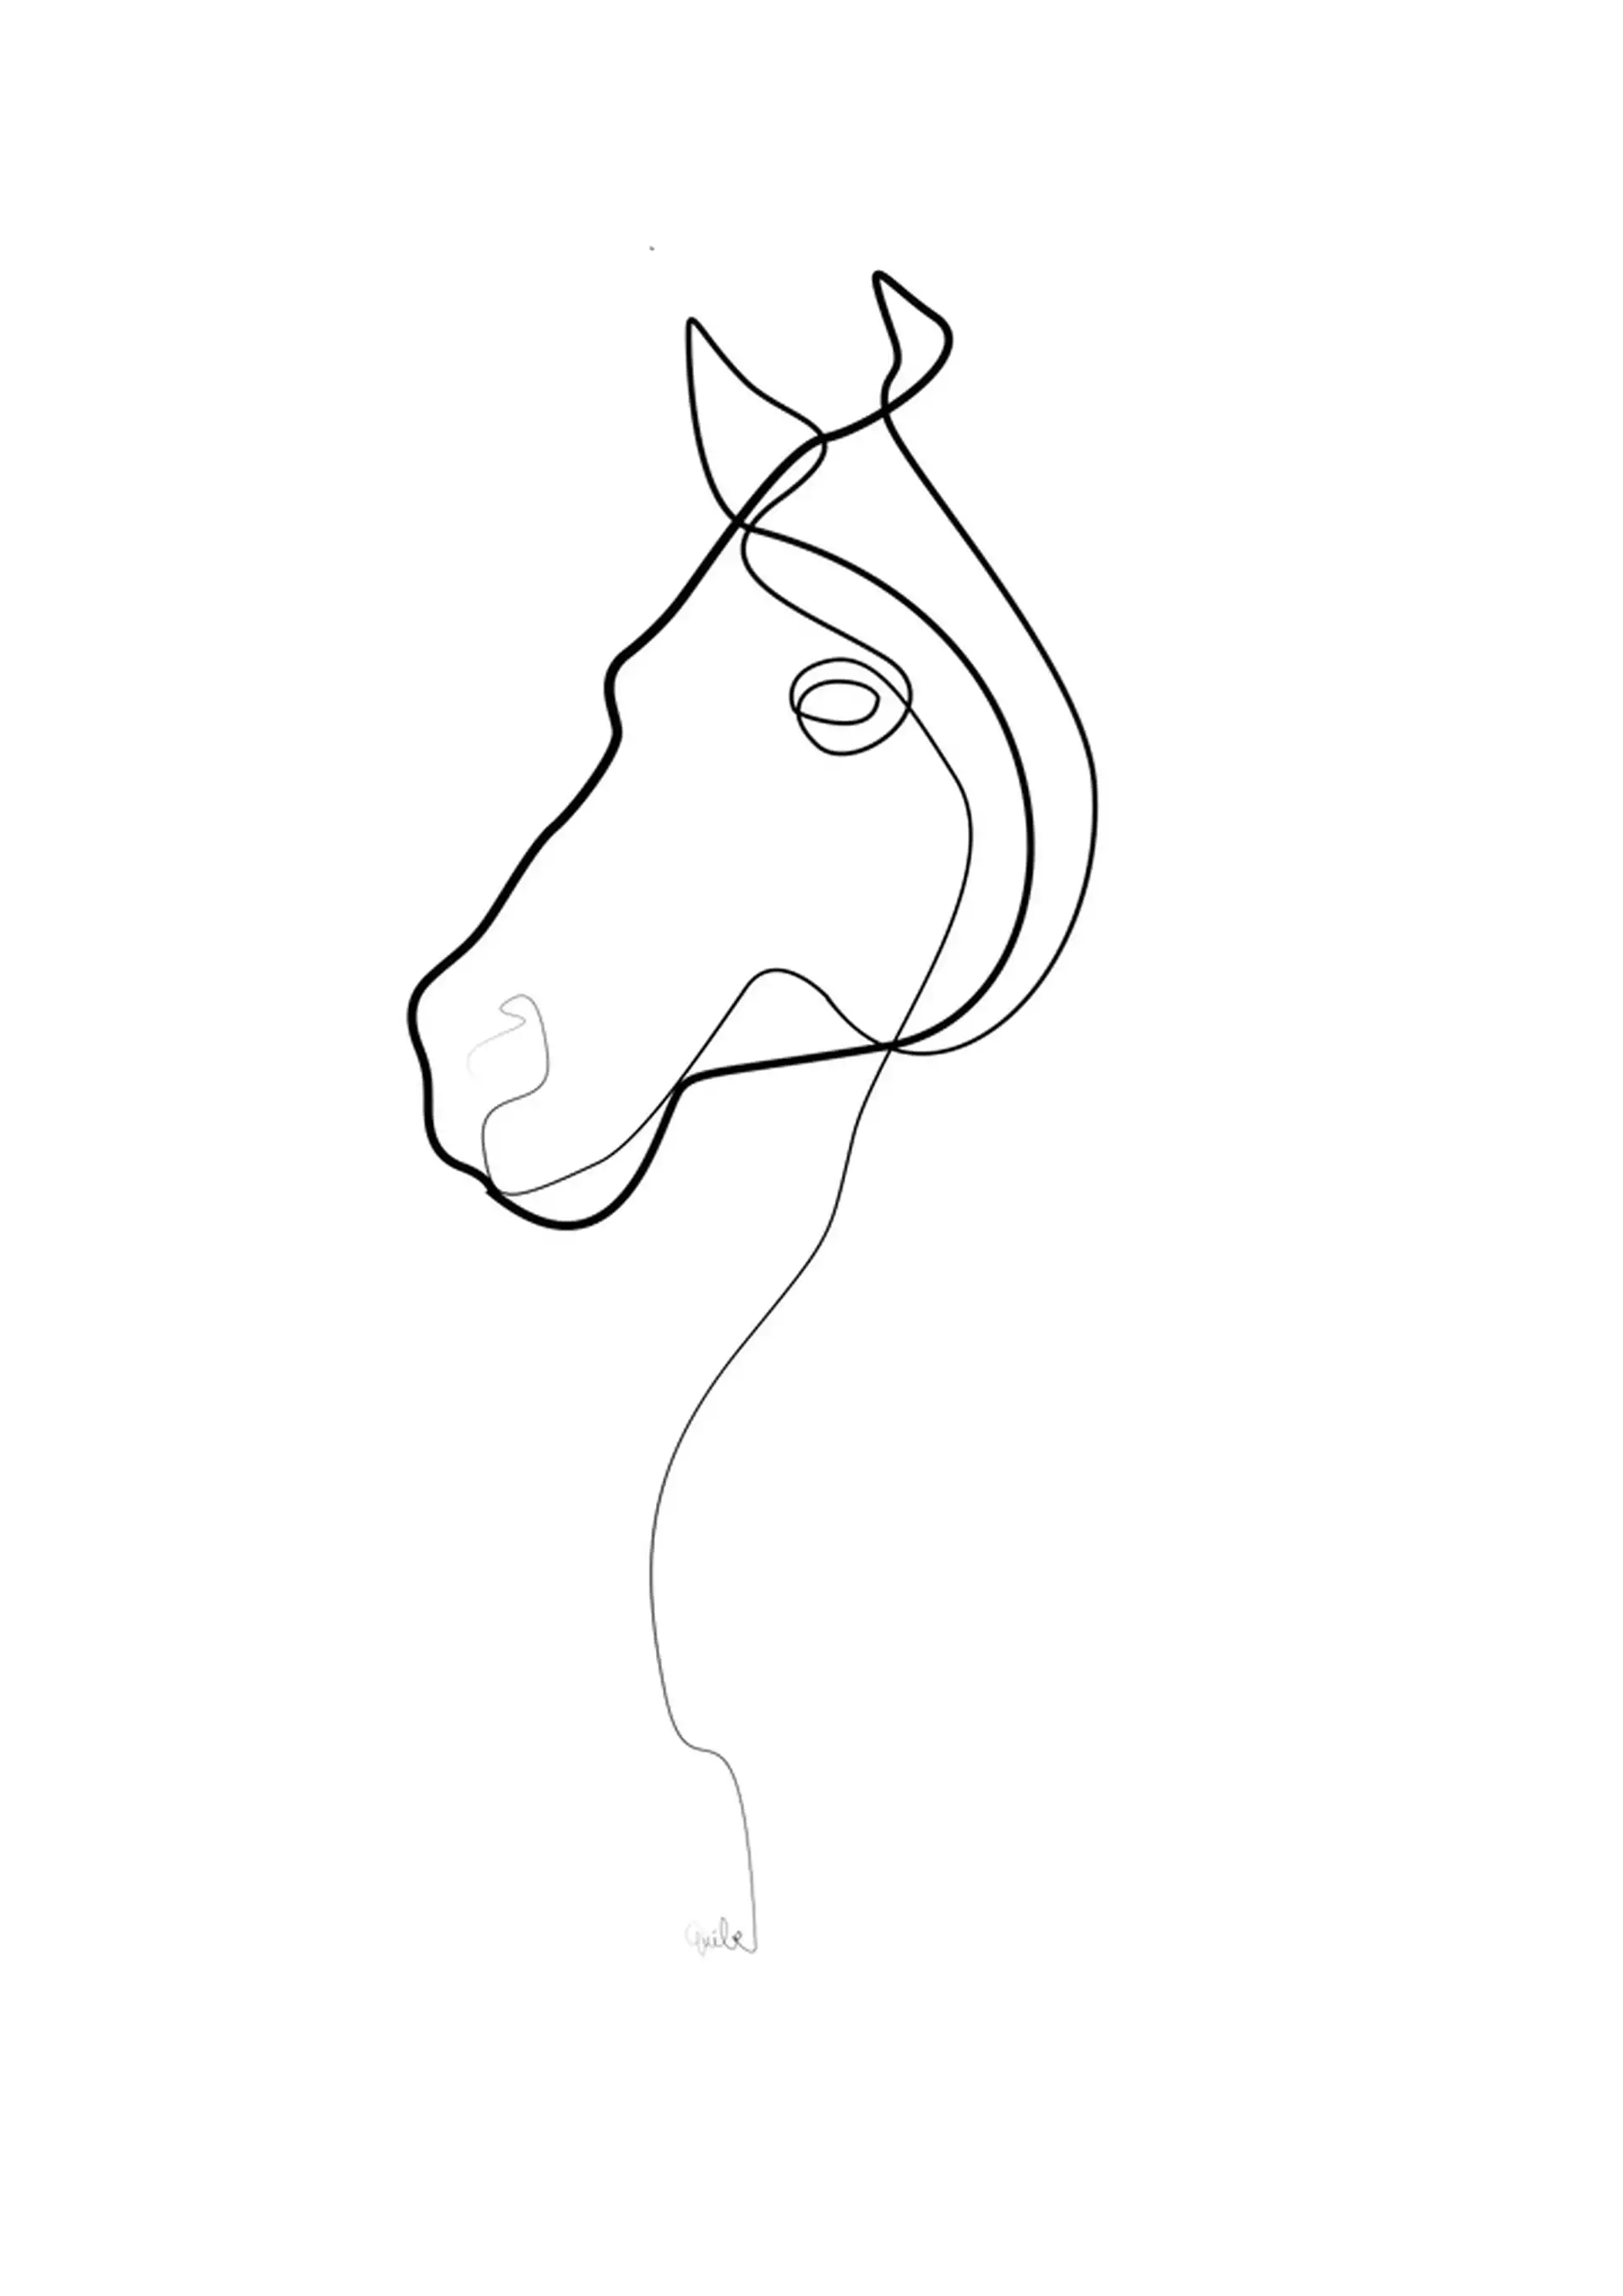 One Line Horse 1811 B Art Print by Quibe - SMALL